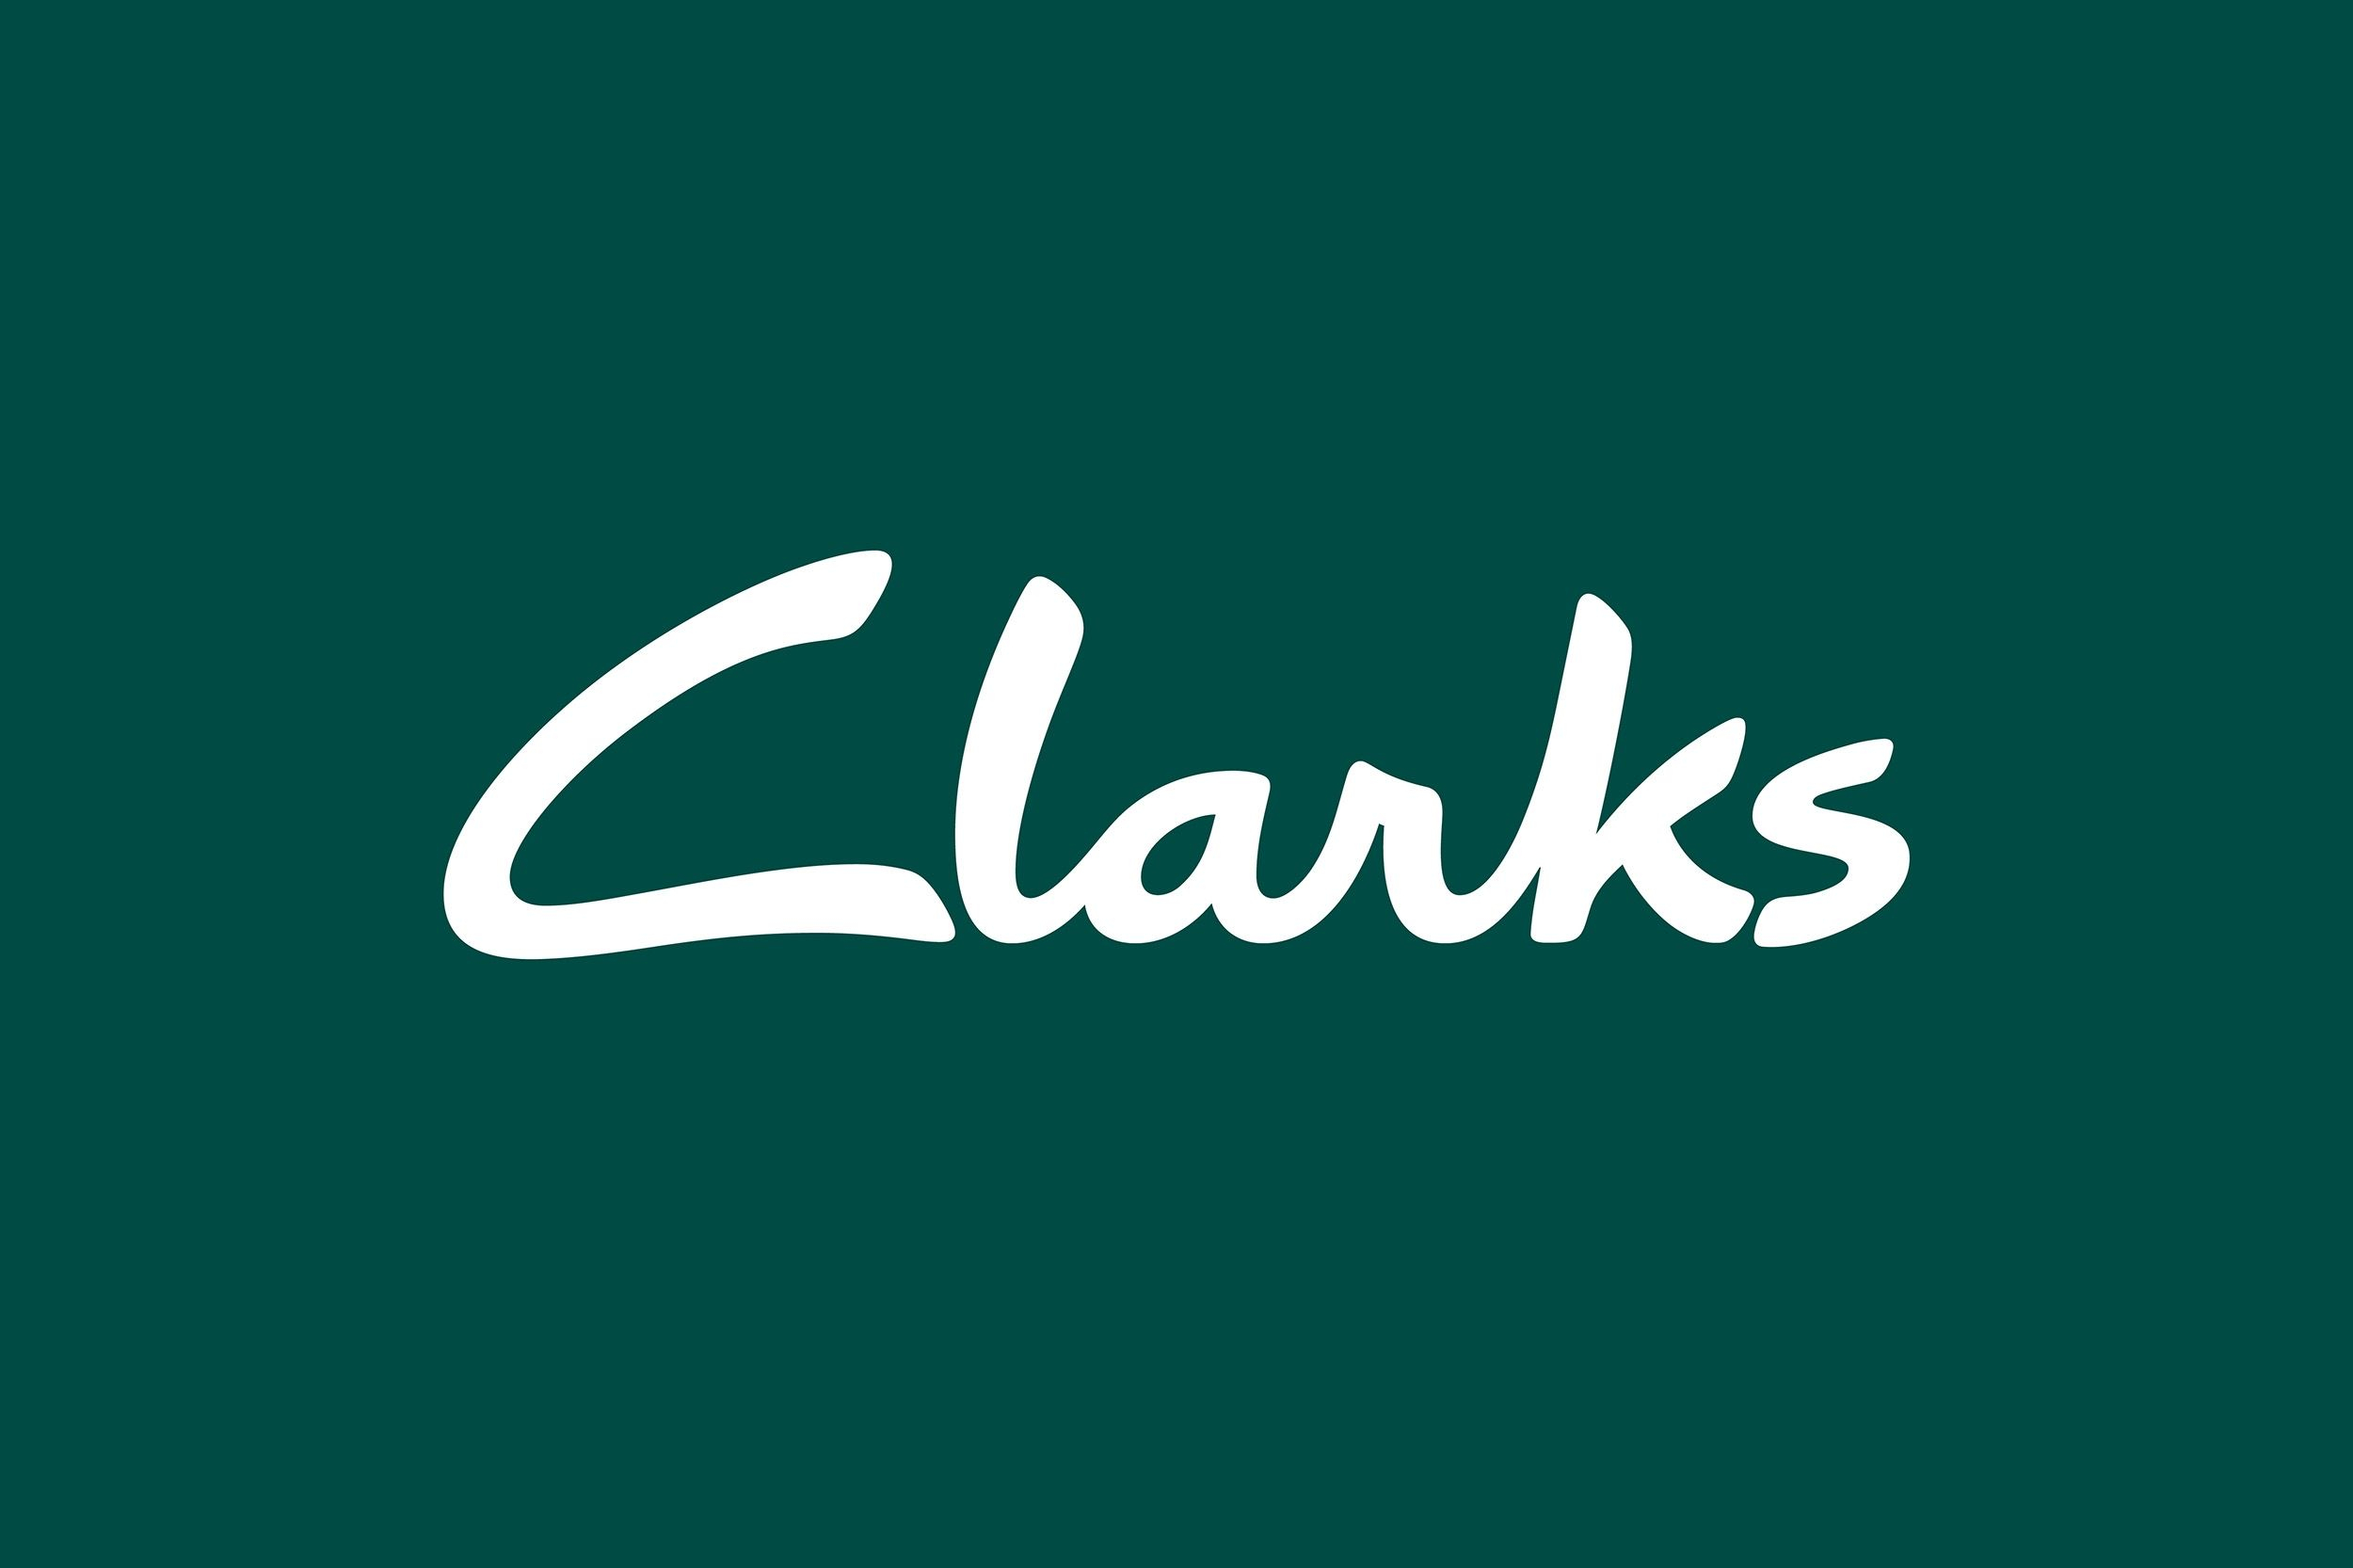 clarks shoes discount code 2019